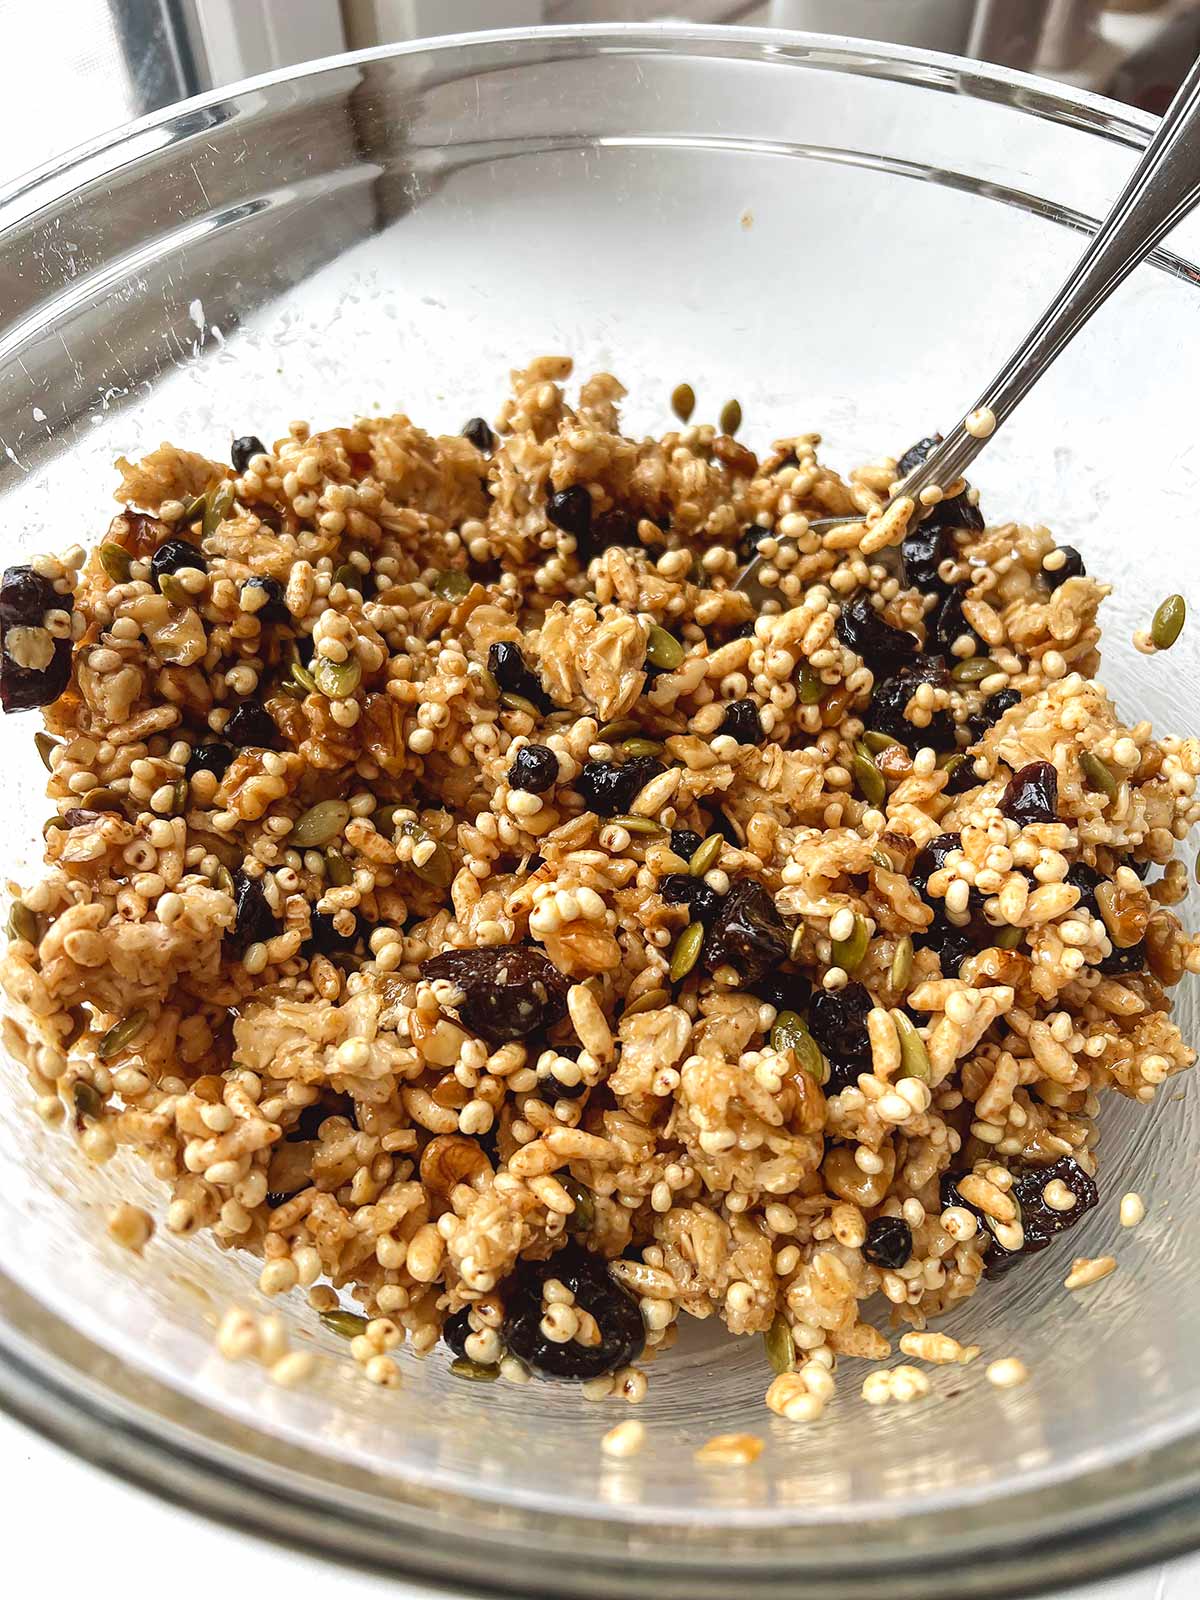 Picture showing  all granola ingredients mixed in a bowl.